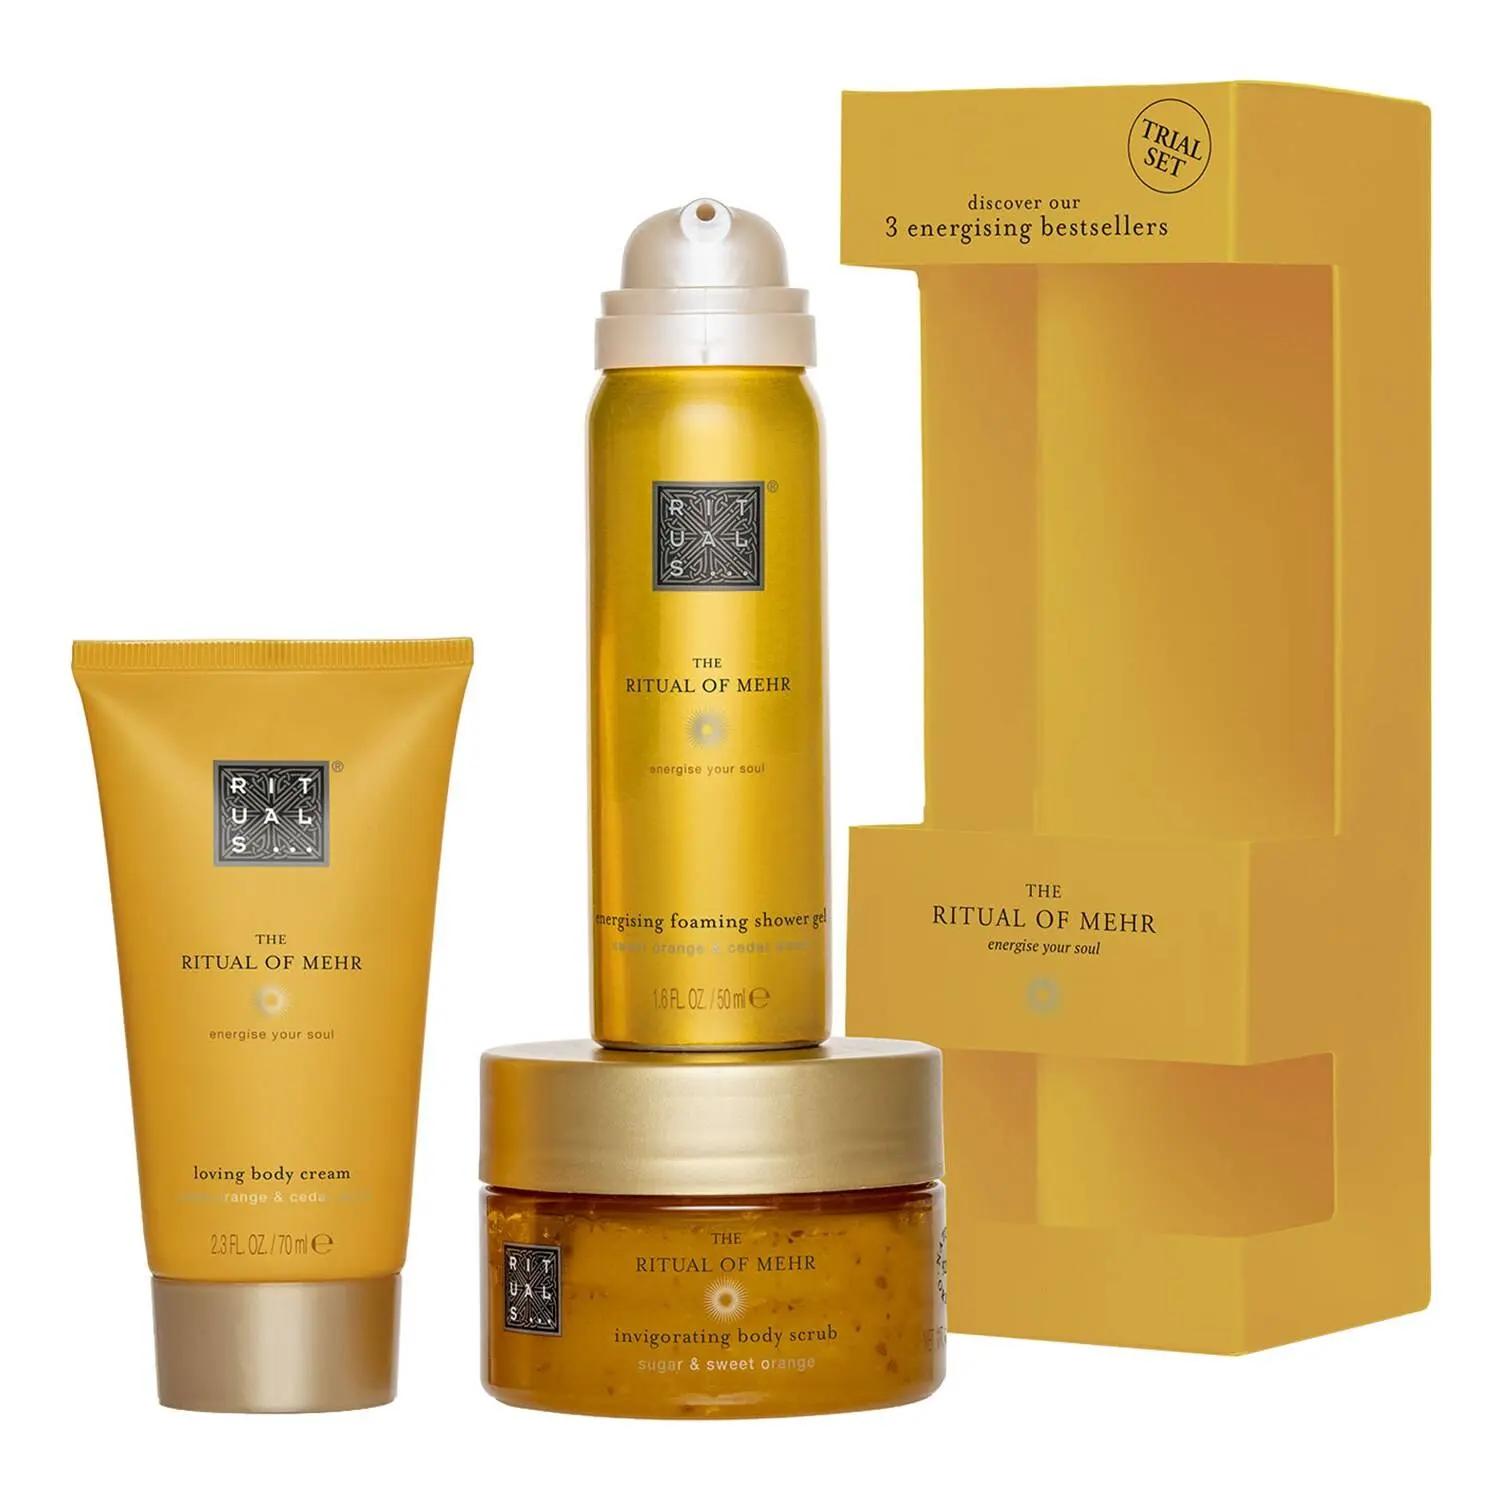 Rituals The Ritual of Mehr Energise Your Soul Trial Set Discounts and Cashback